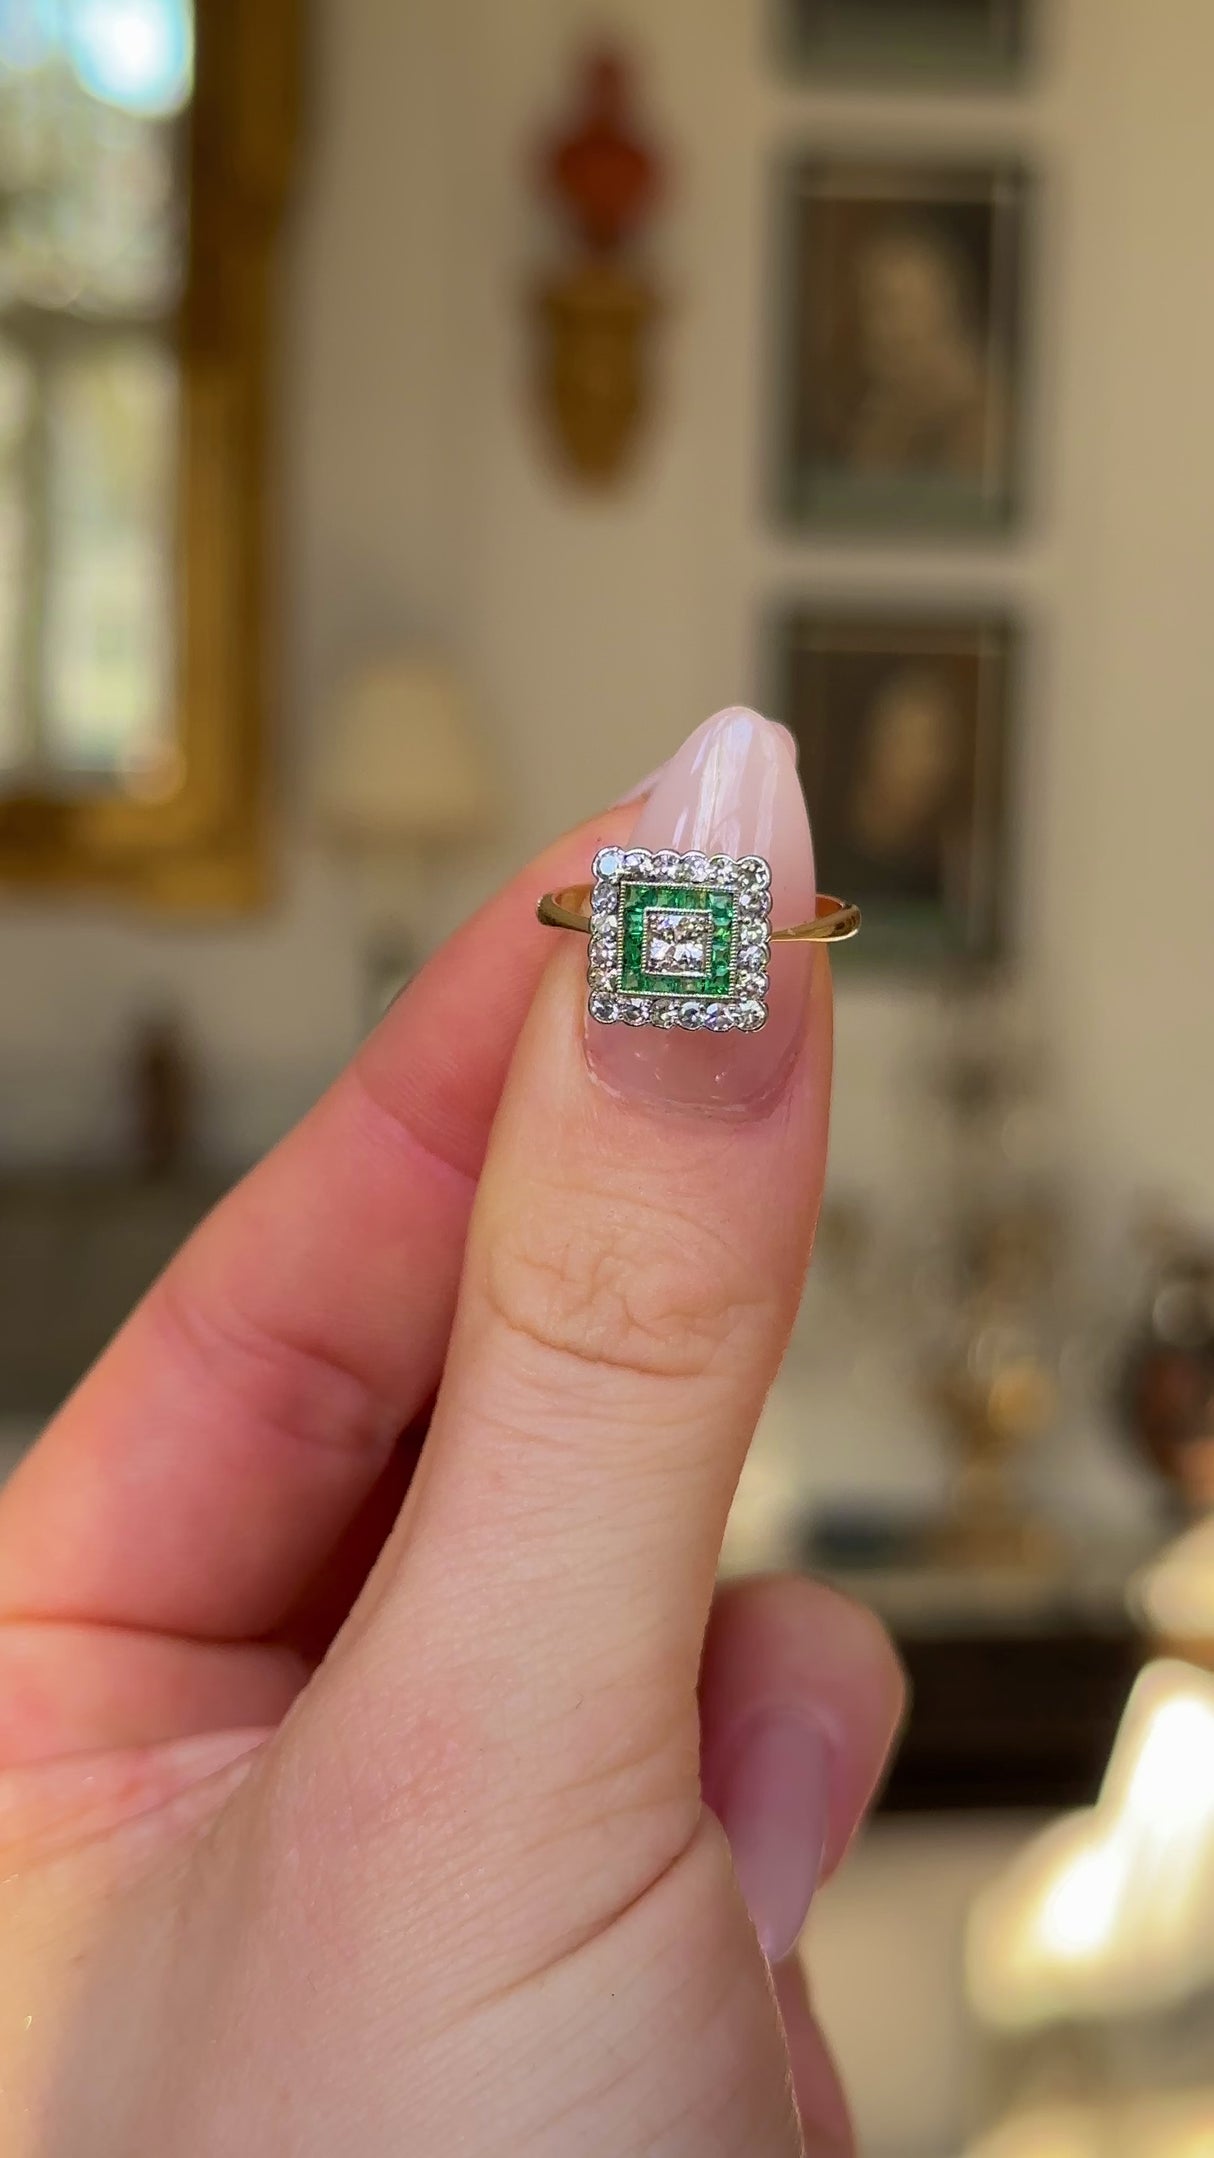 Antique, Emerald and Diamond Square Cluster Ring, 18ct Yellow Gold and Platinum held in fingers and rotated to give perspective.